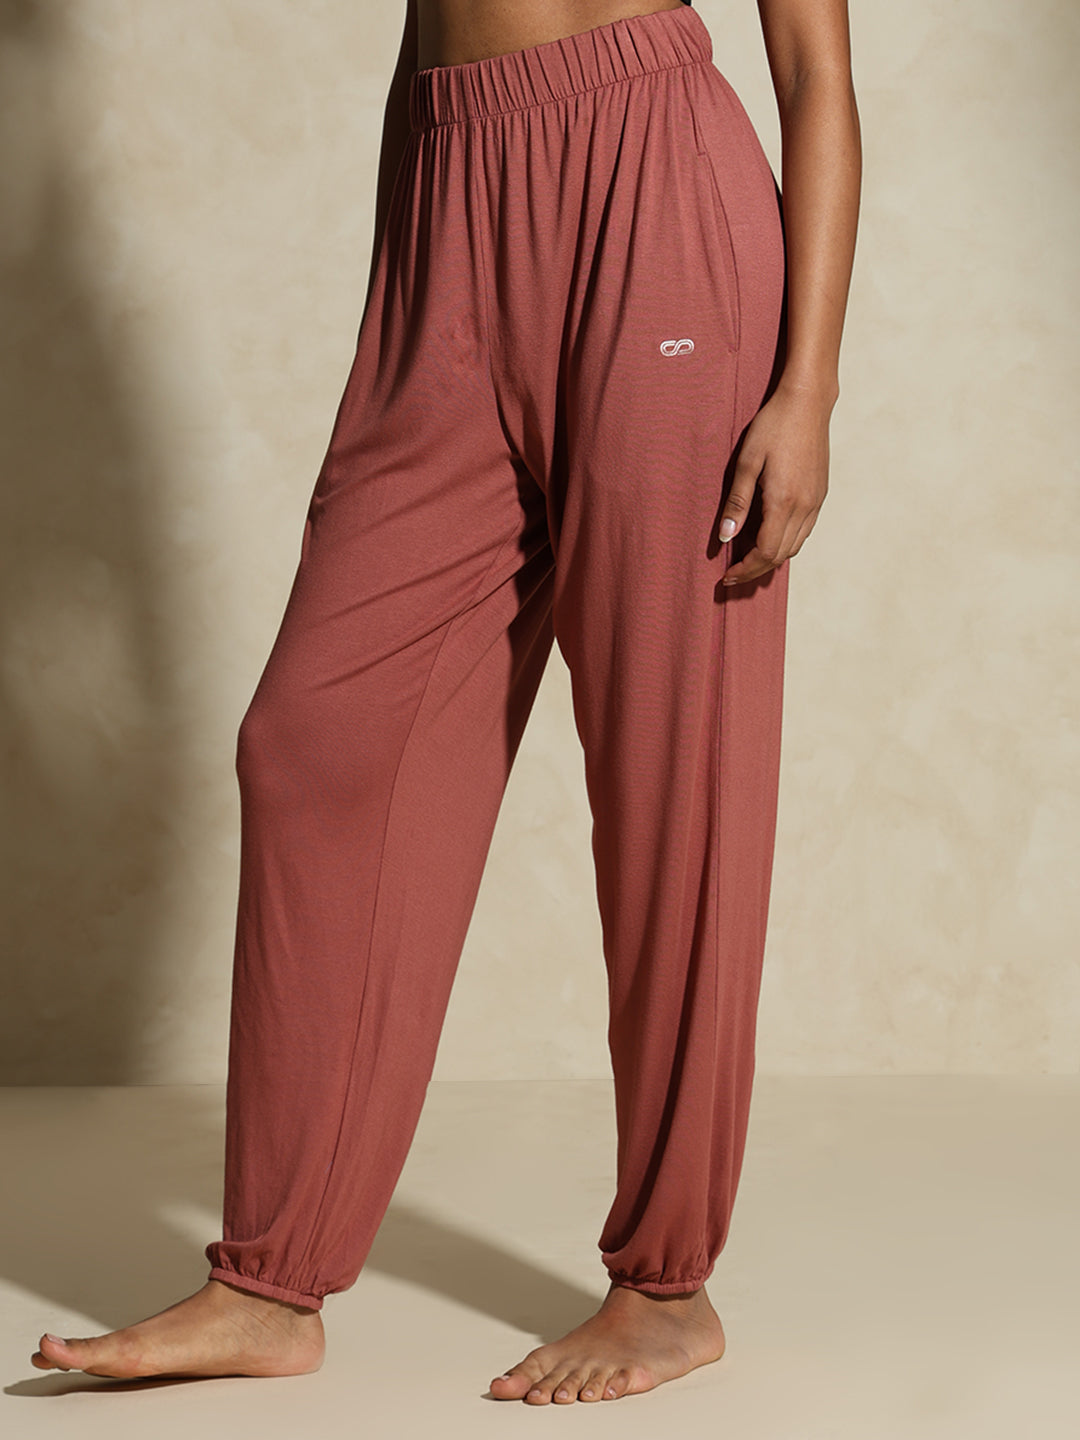 Silvertraq Launches Brand New Loungewear Collection For Women! - Women  Fitness Org